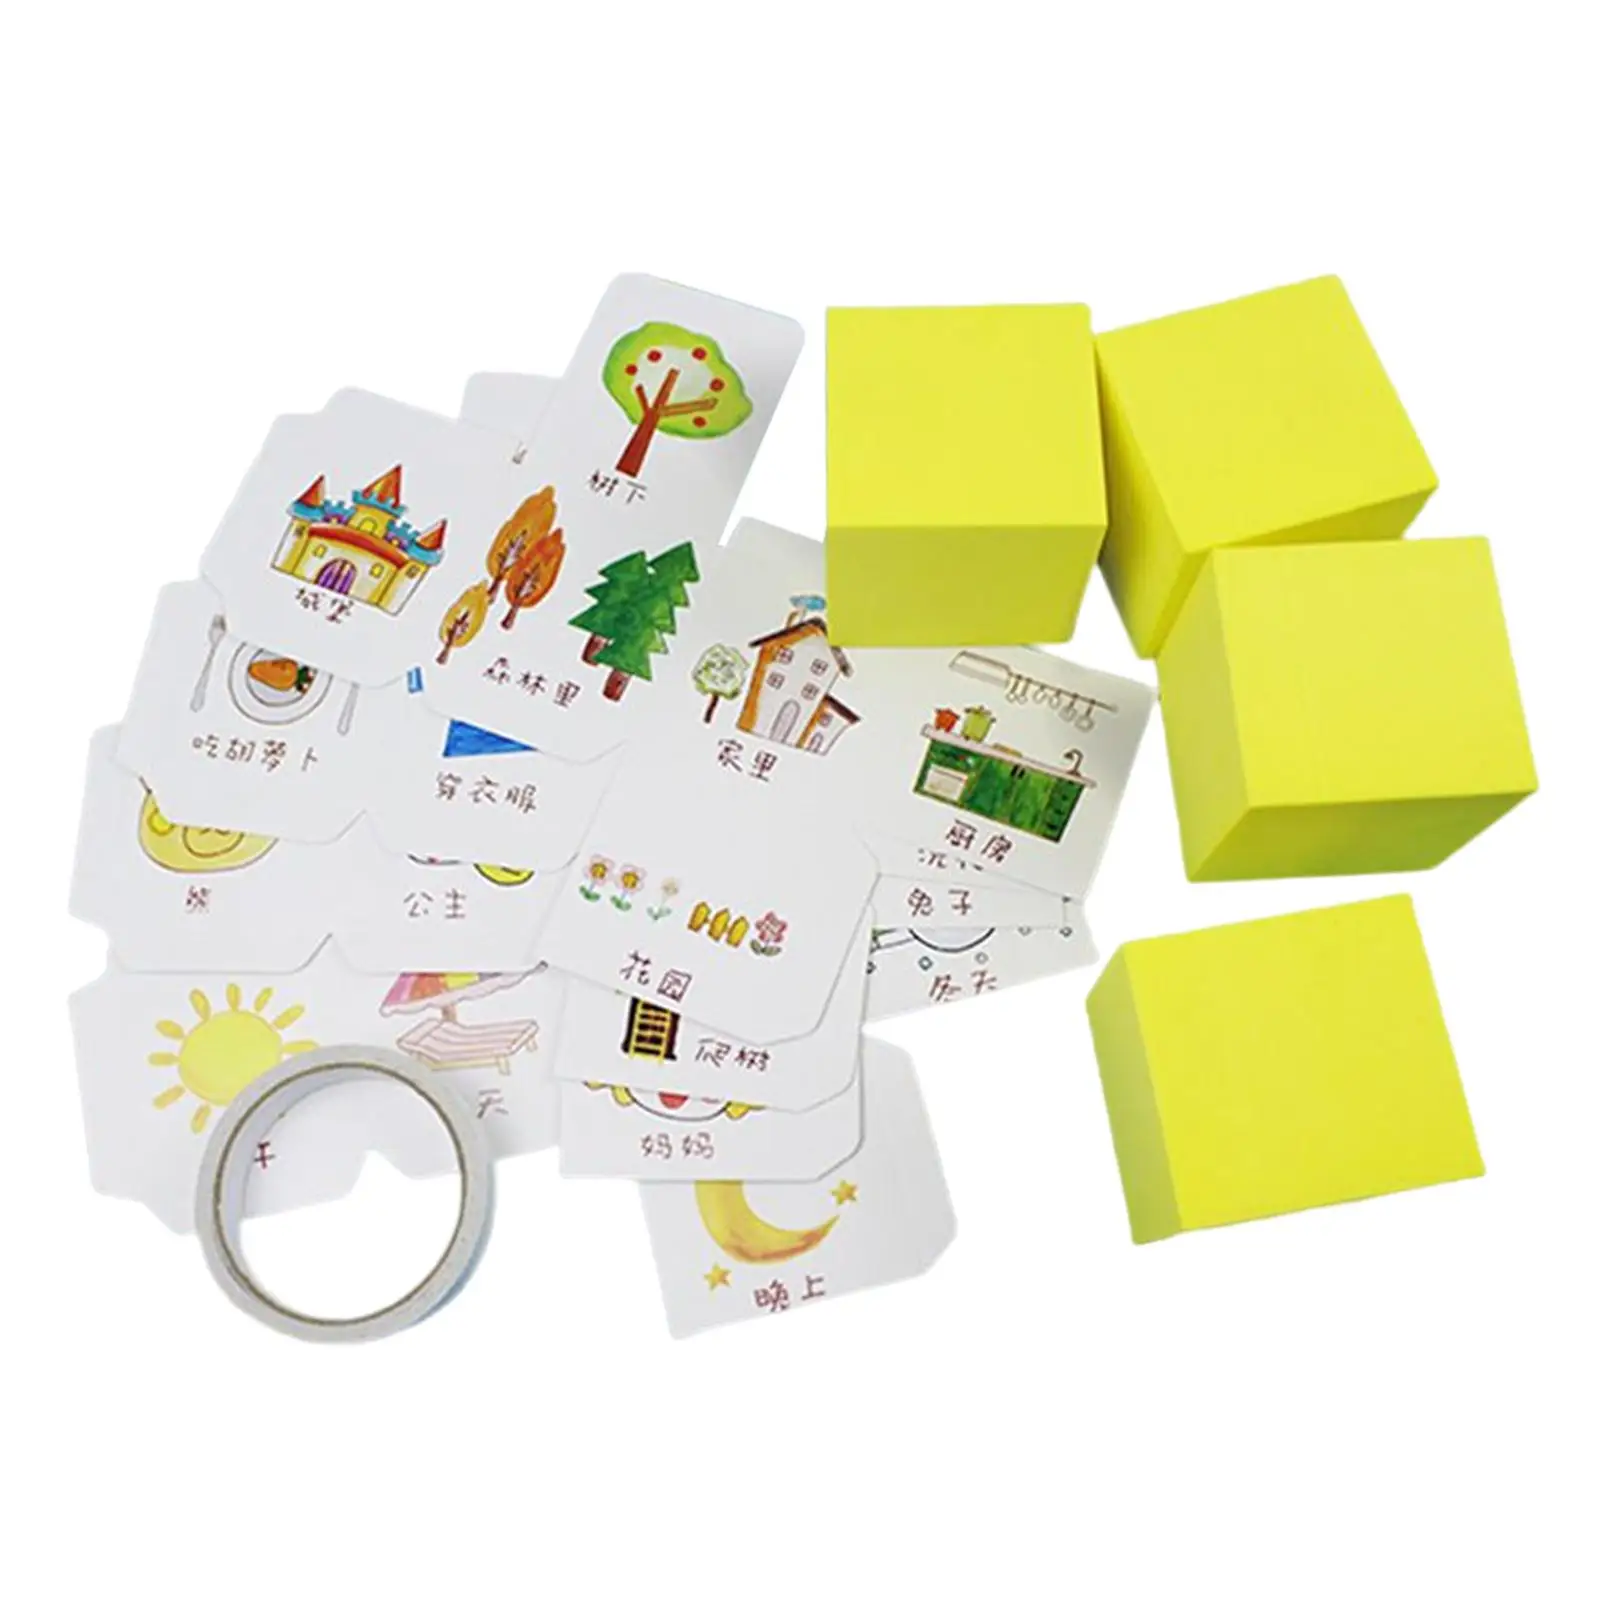 Square 6 Sided Blank Dice with 4 Flash Card Foam Dice for Preschool Ages 3+